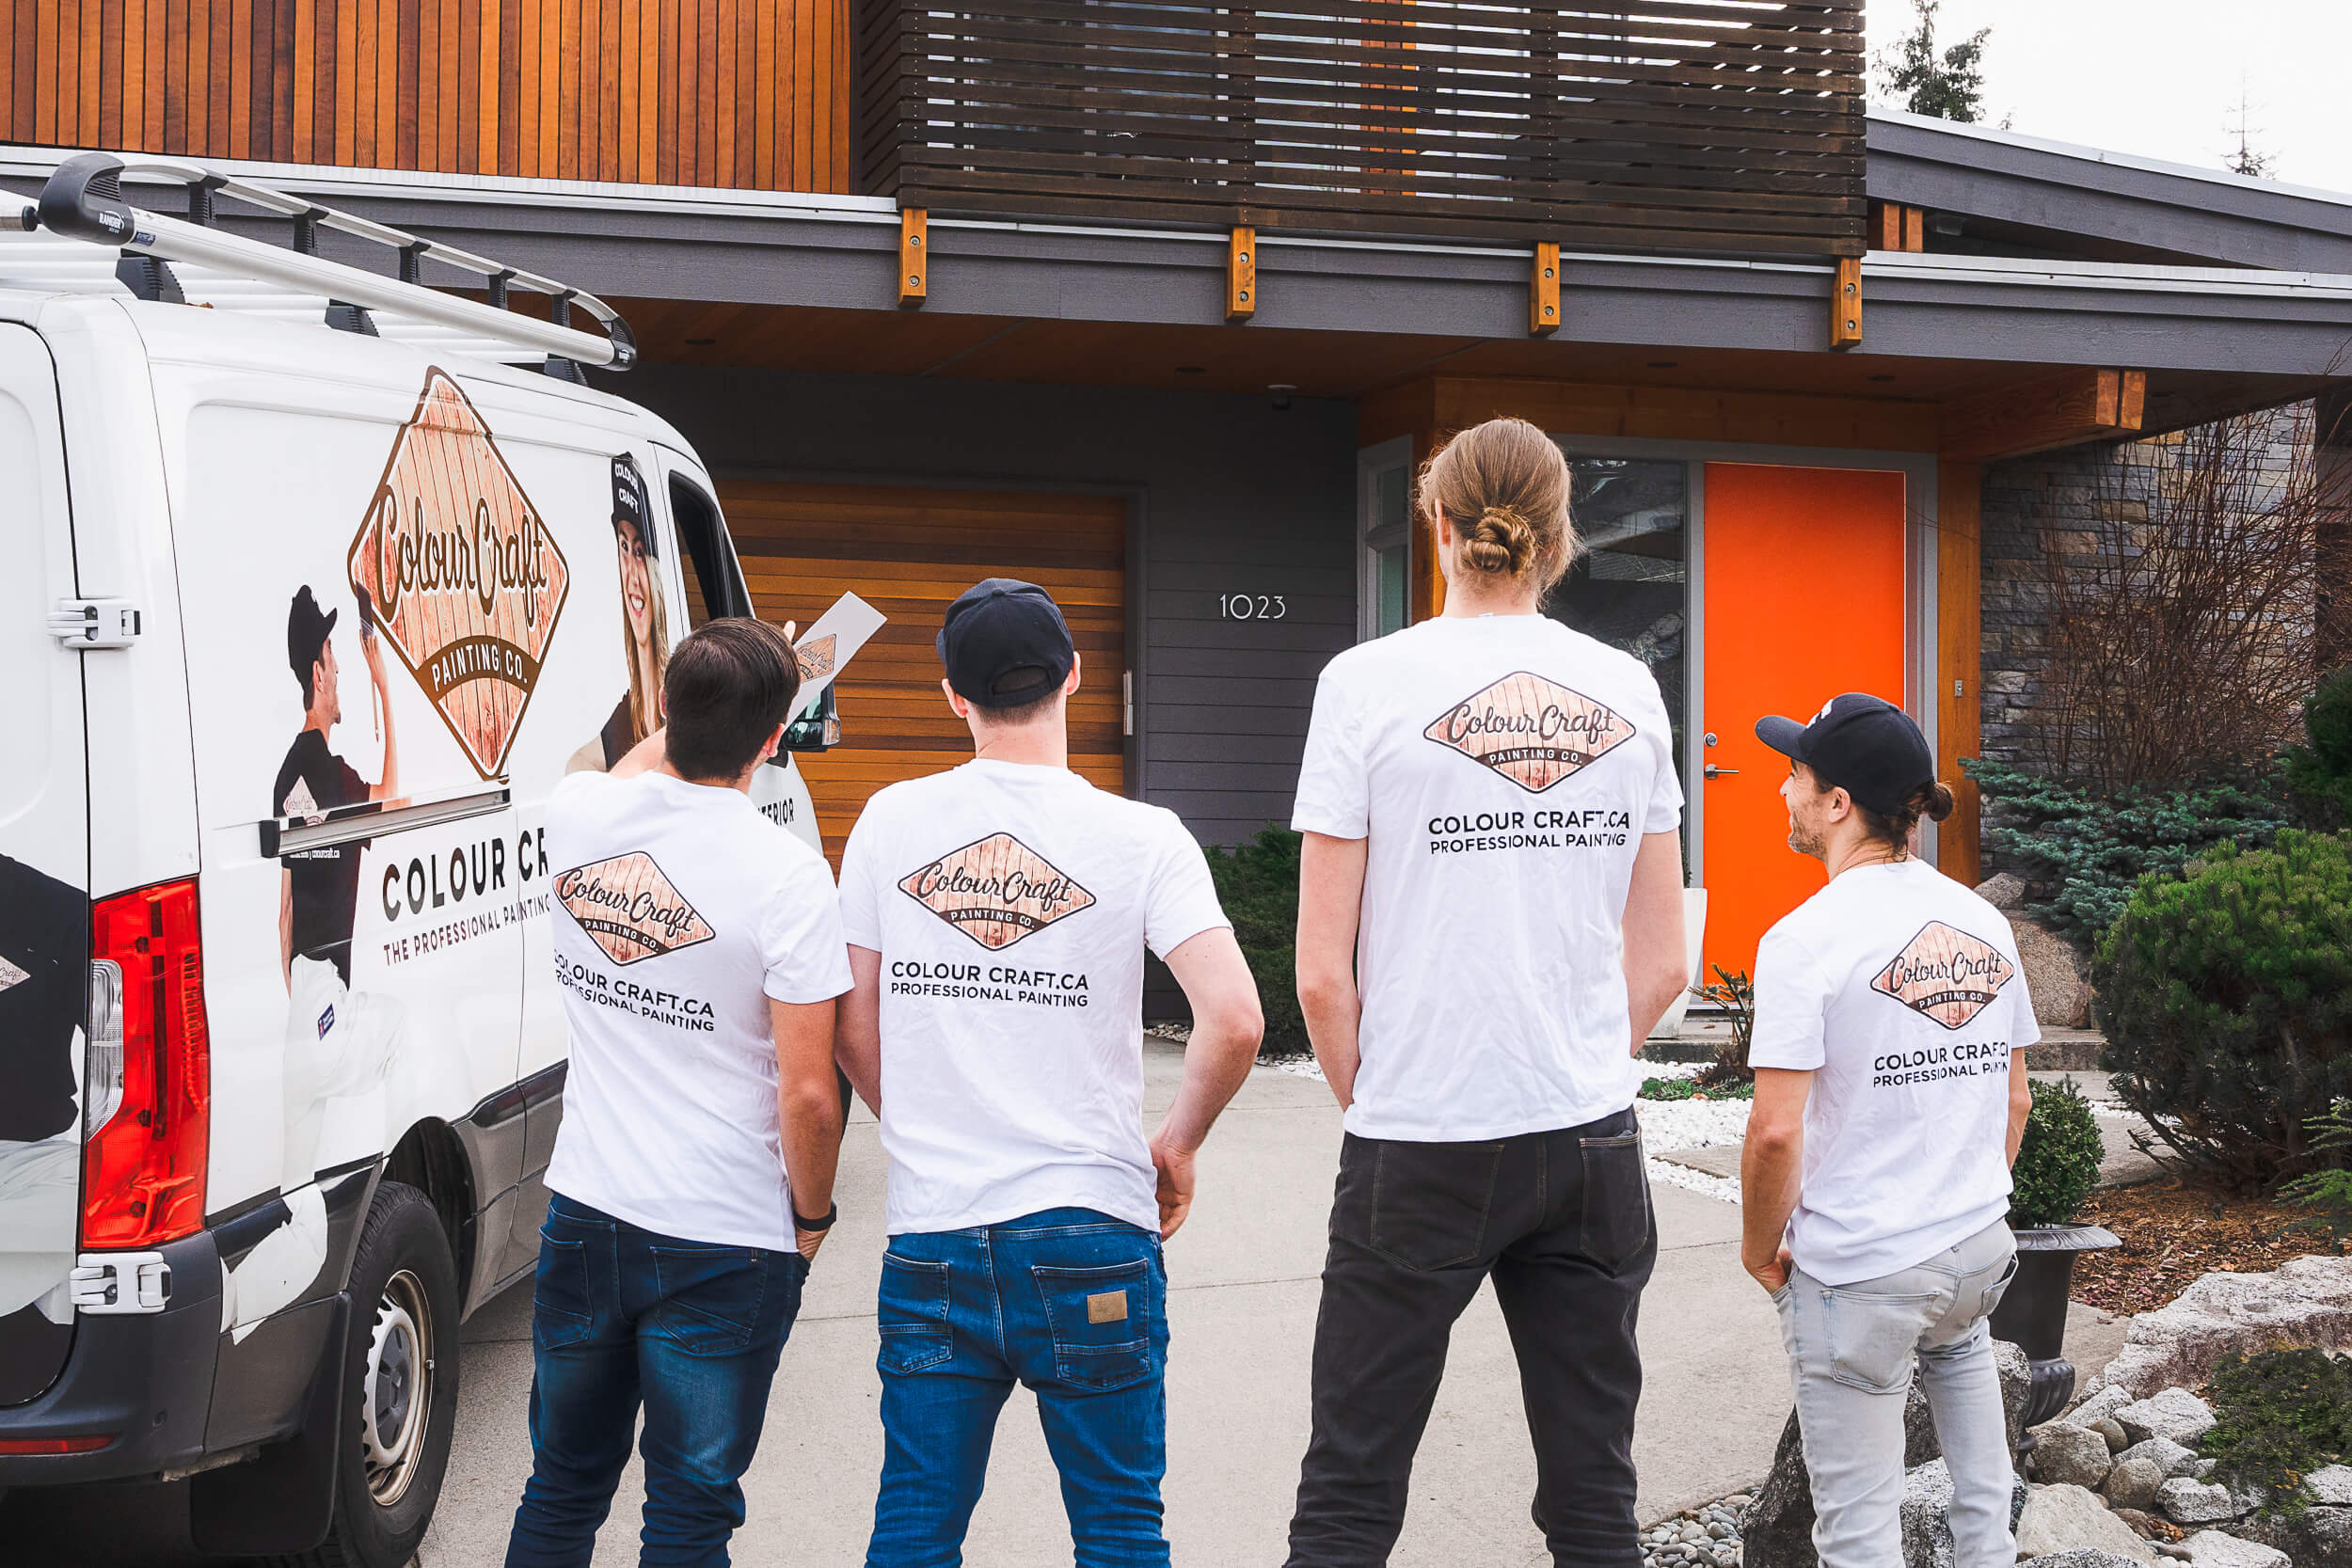 A team of friendly Colour Craft painters engaging in a lively discussion outside their service van. They are dressed in uniform white t-shirts with the company's logo, sharing a laugh while reviewing a project plan, conveying a professional yet approachable image of the company's workforce.